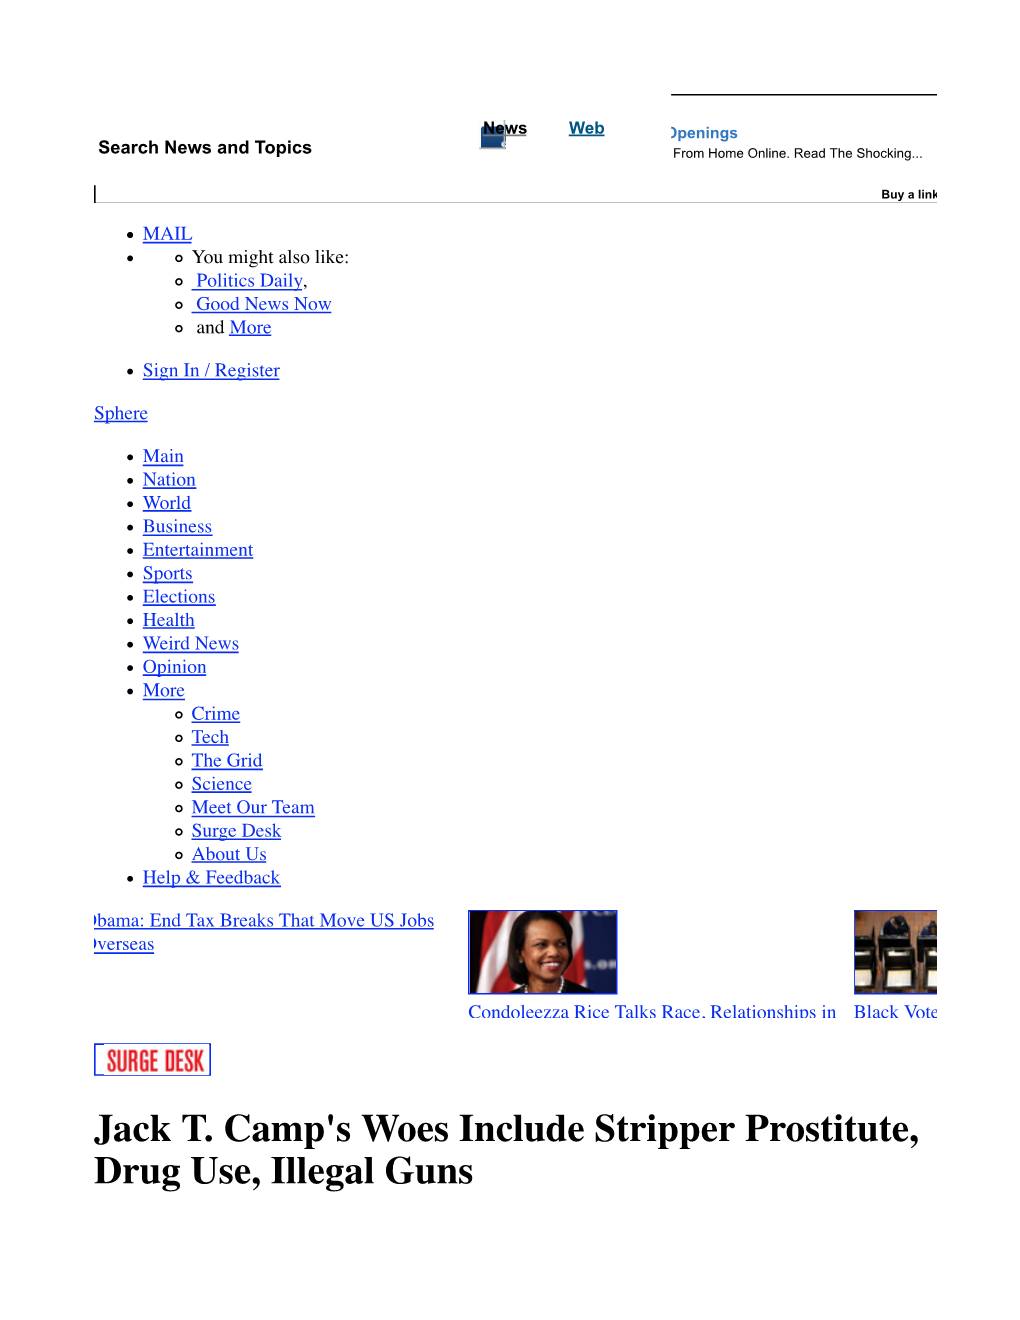 Jack T. Camp's Woes Include Stripper Prostitute, Drug Use, Illegal Guns Updated: 11 Days 22 Hours Ago Text Size | Email